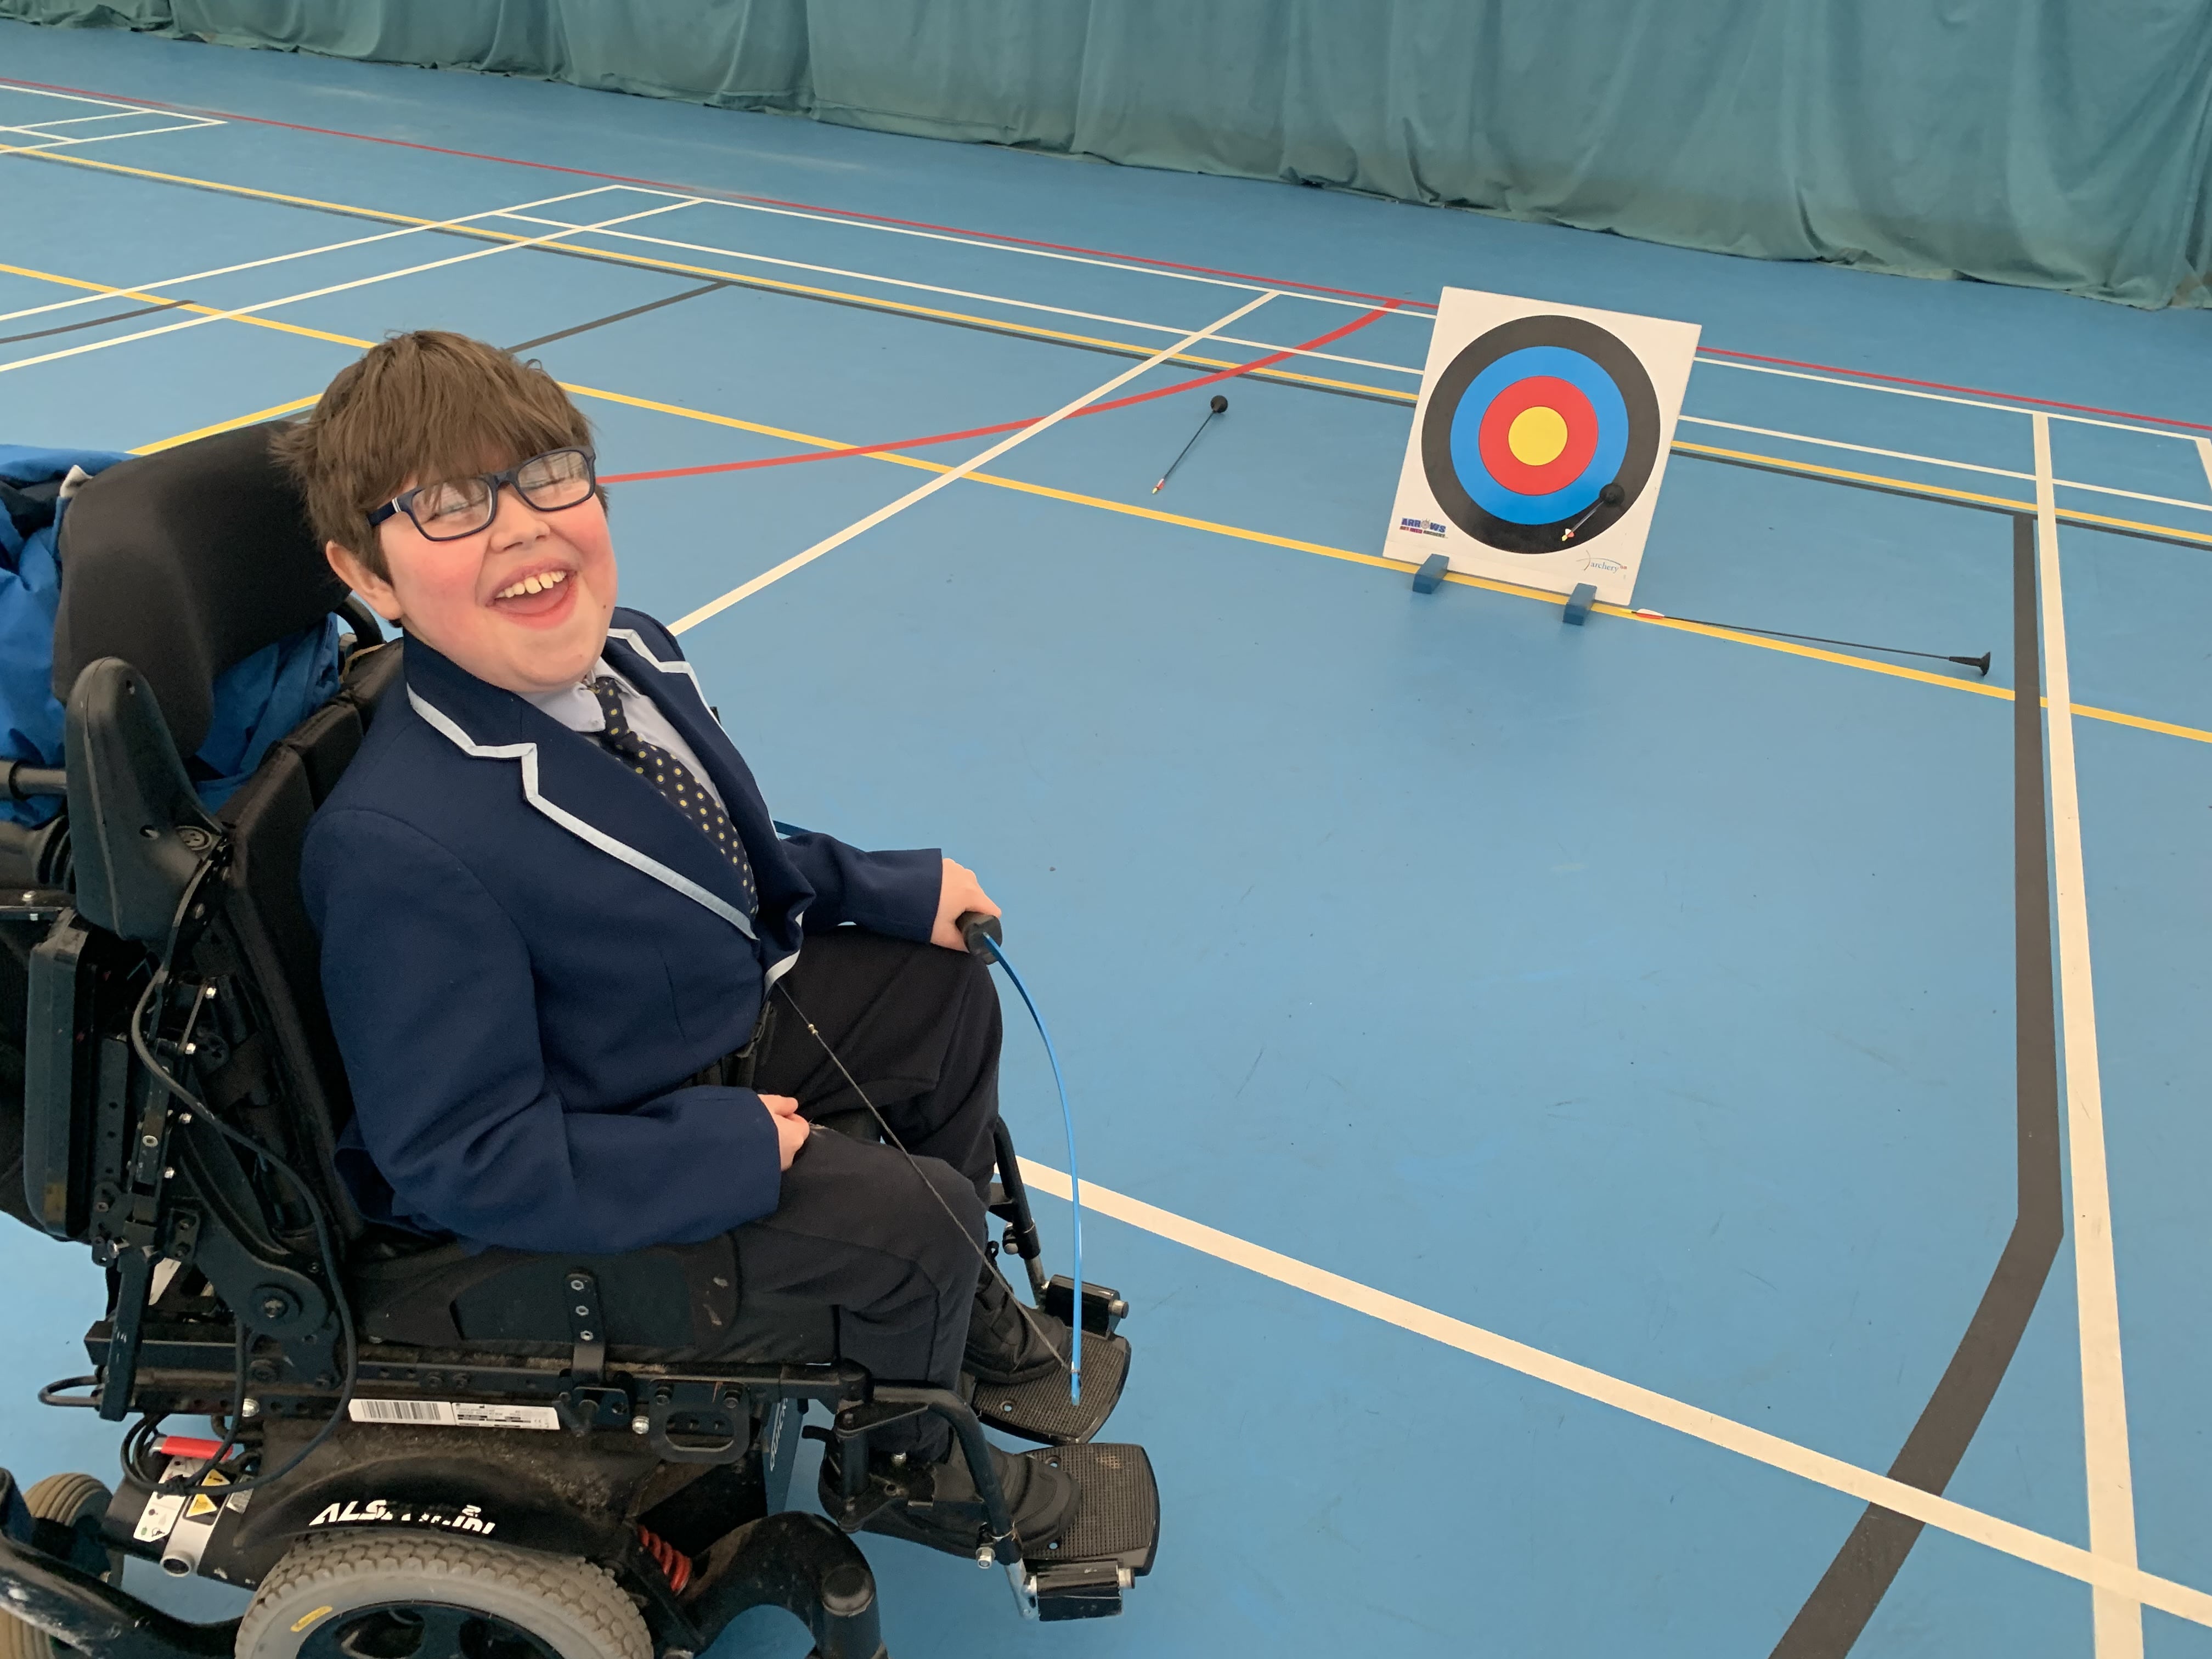 Young boy in a wheelchair in sports hall playing archery